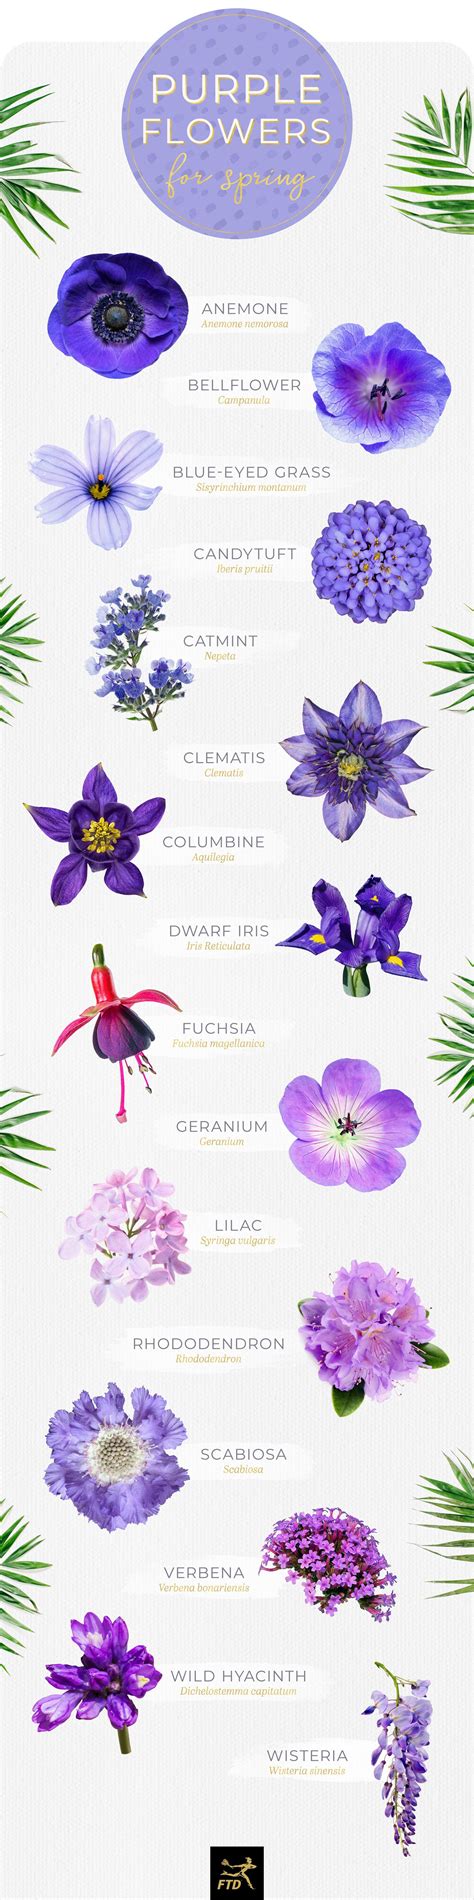 Types Of Purple Flowers With Names Sschool Age Activities For Daycare